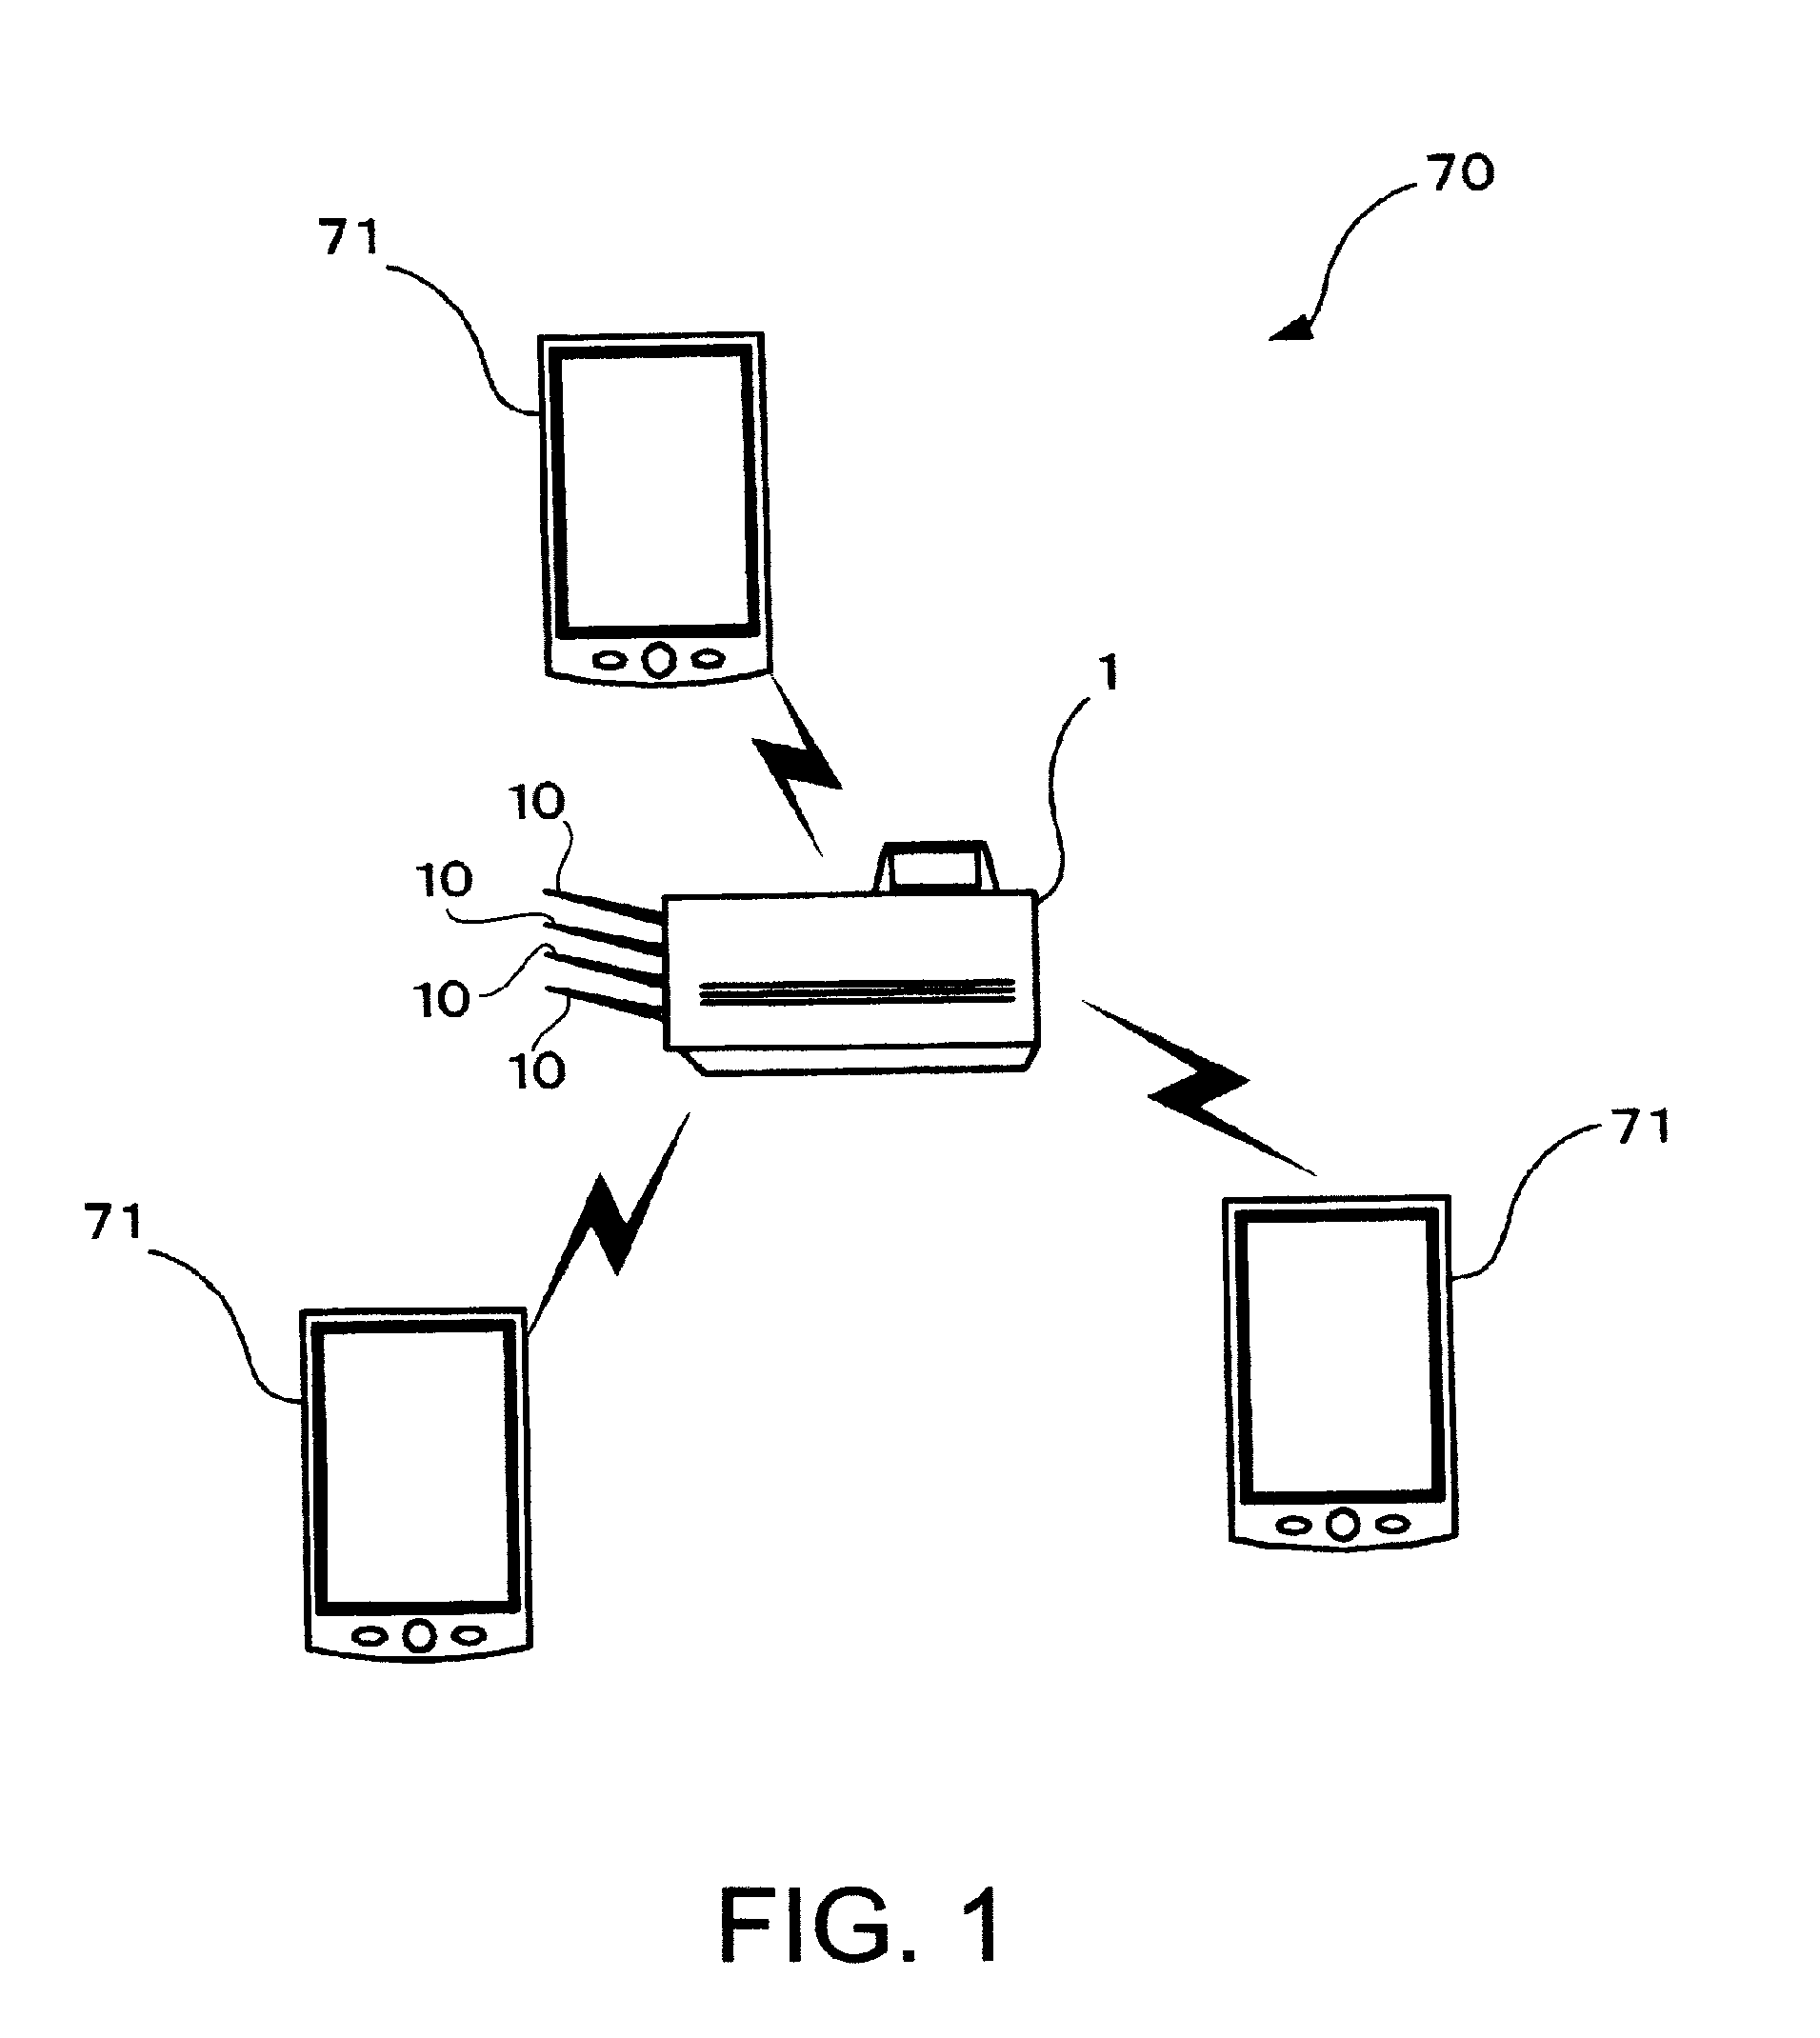 Image recording system, image recording apparatus, and computer usable medium therefor